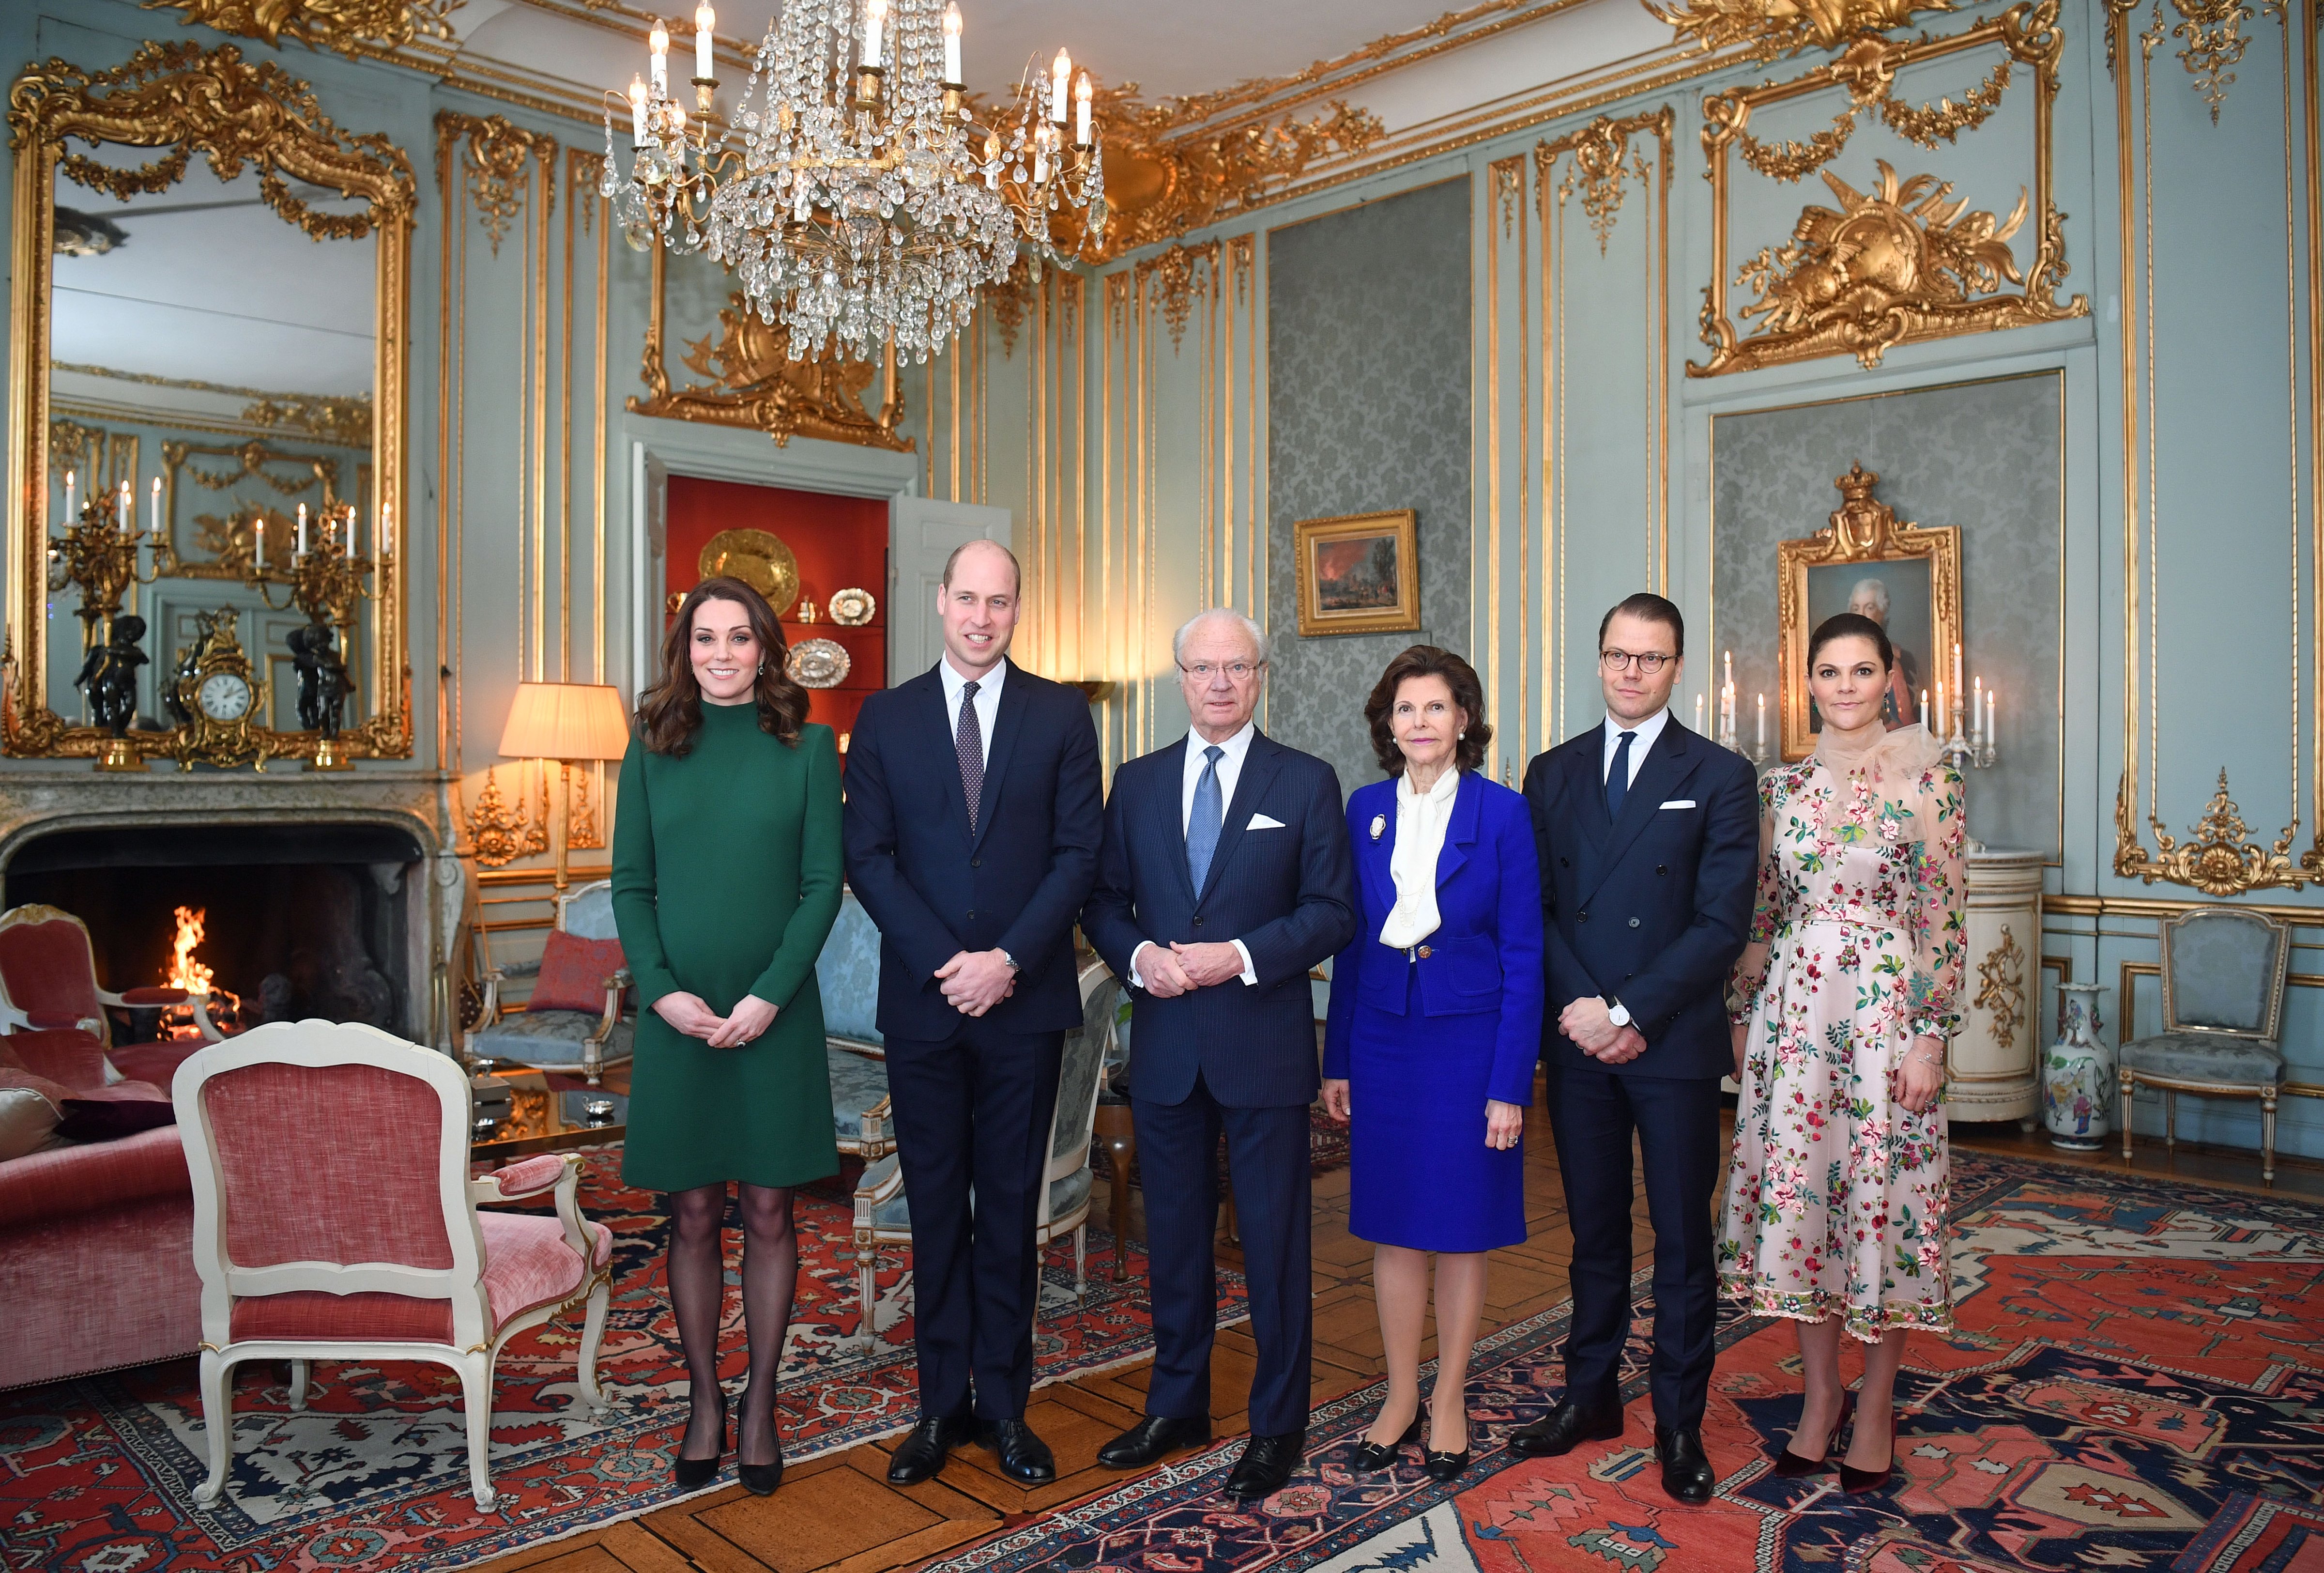 STOCKHOLM, SWEDEN - JANUARY 30: Catherine, Duchess of Cambridge and Prince William, Duke of Cambridge pose with King Carl XVI Gustaf of Sweden, Queen Silvia of Sweden, Prince Daniel, Duke of Vastergotland and Crown Princess Victoria of Sweden ahead of a lunch at the Royal Palace of Stockholm during day one of their Royal visit to Sweden on January 30, 2018 in Stockholm, Sweden. (Photo by Victoria Jones-Pool/Getty Images) (Pool—Getty Images)